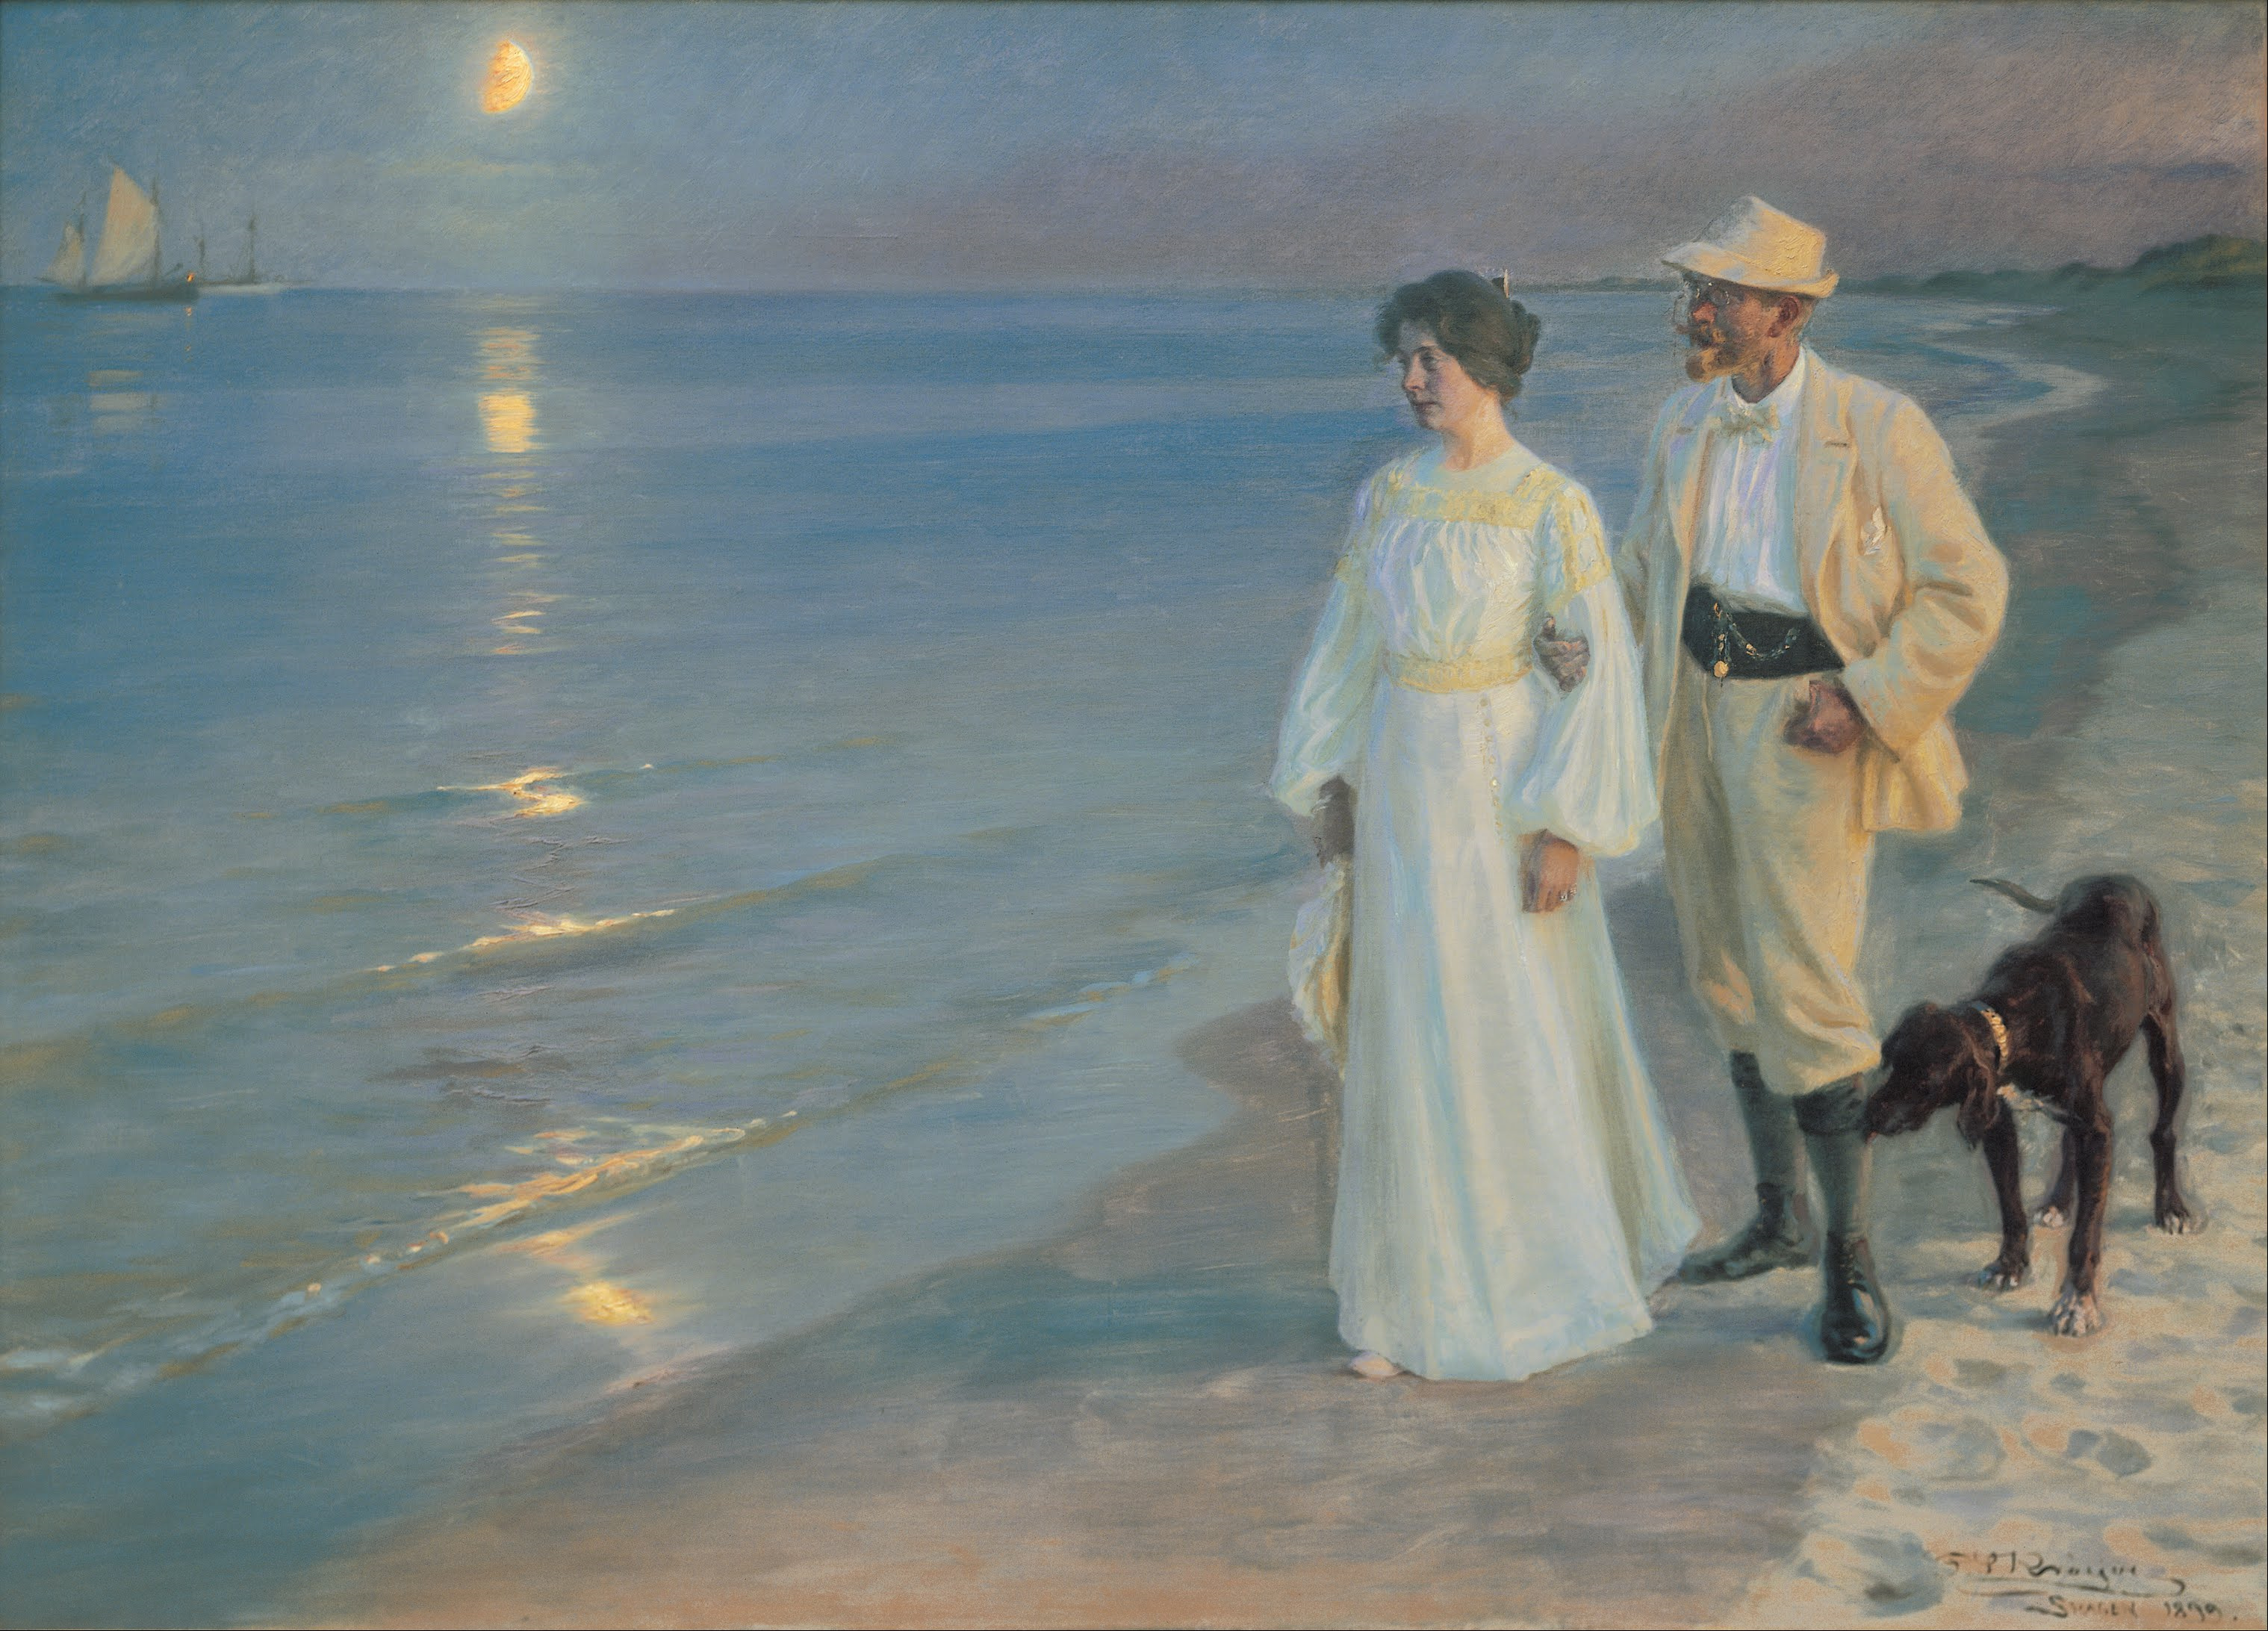 Peder Severin Krøyer - Summer evening on the beach at Skagen. The painter and his wife. - Google Art Project